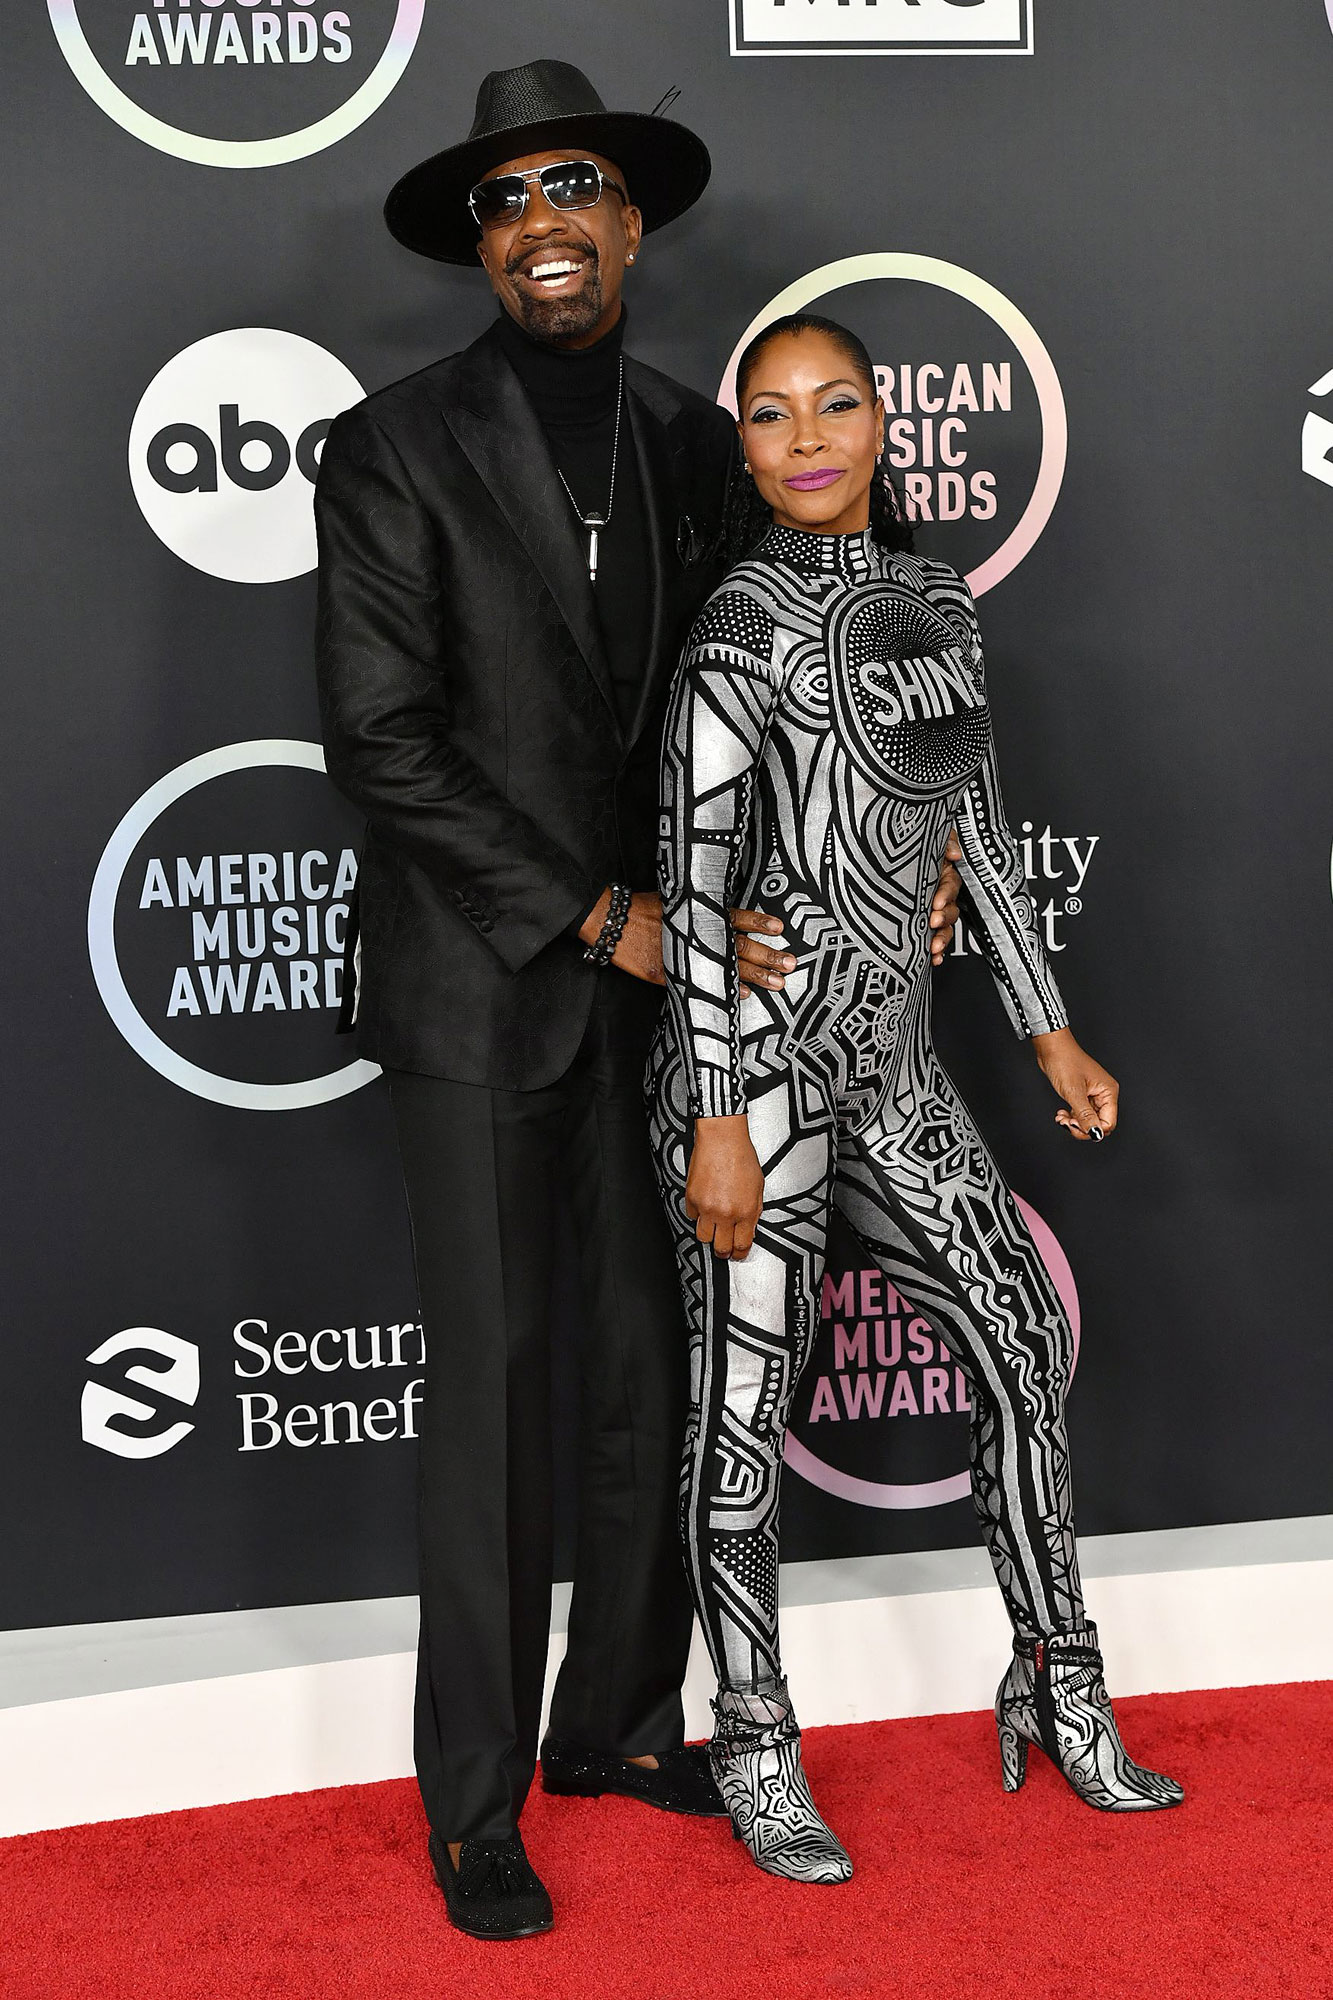 American Music Awards: Hottest Couples on the Red Carpet